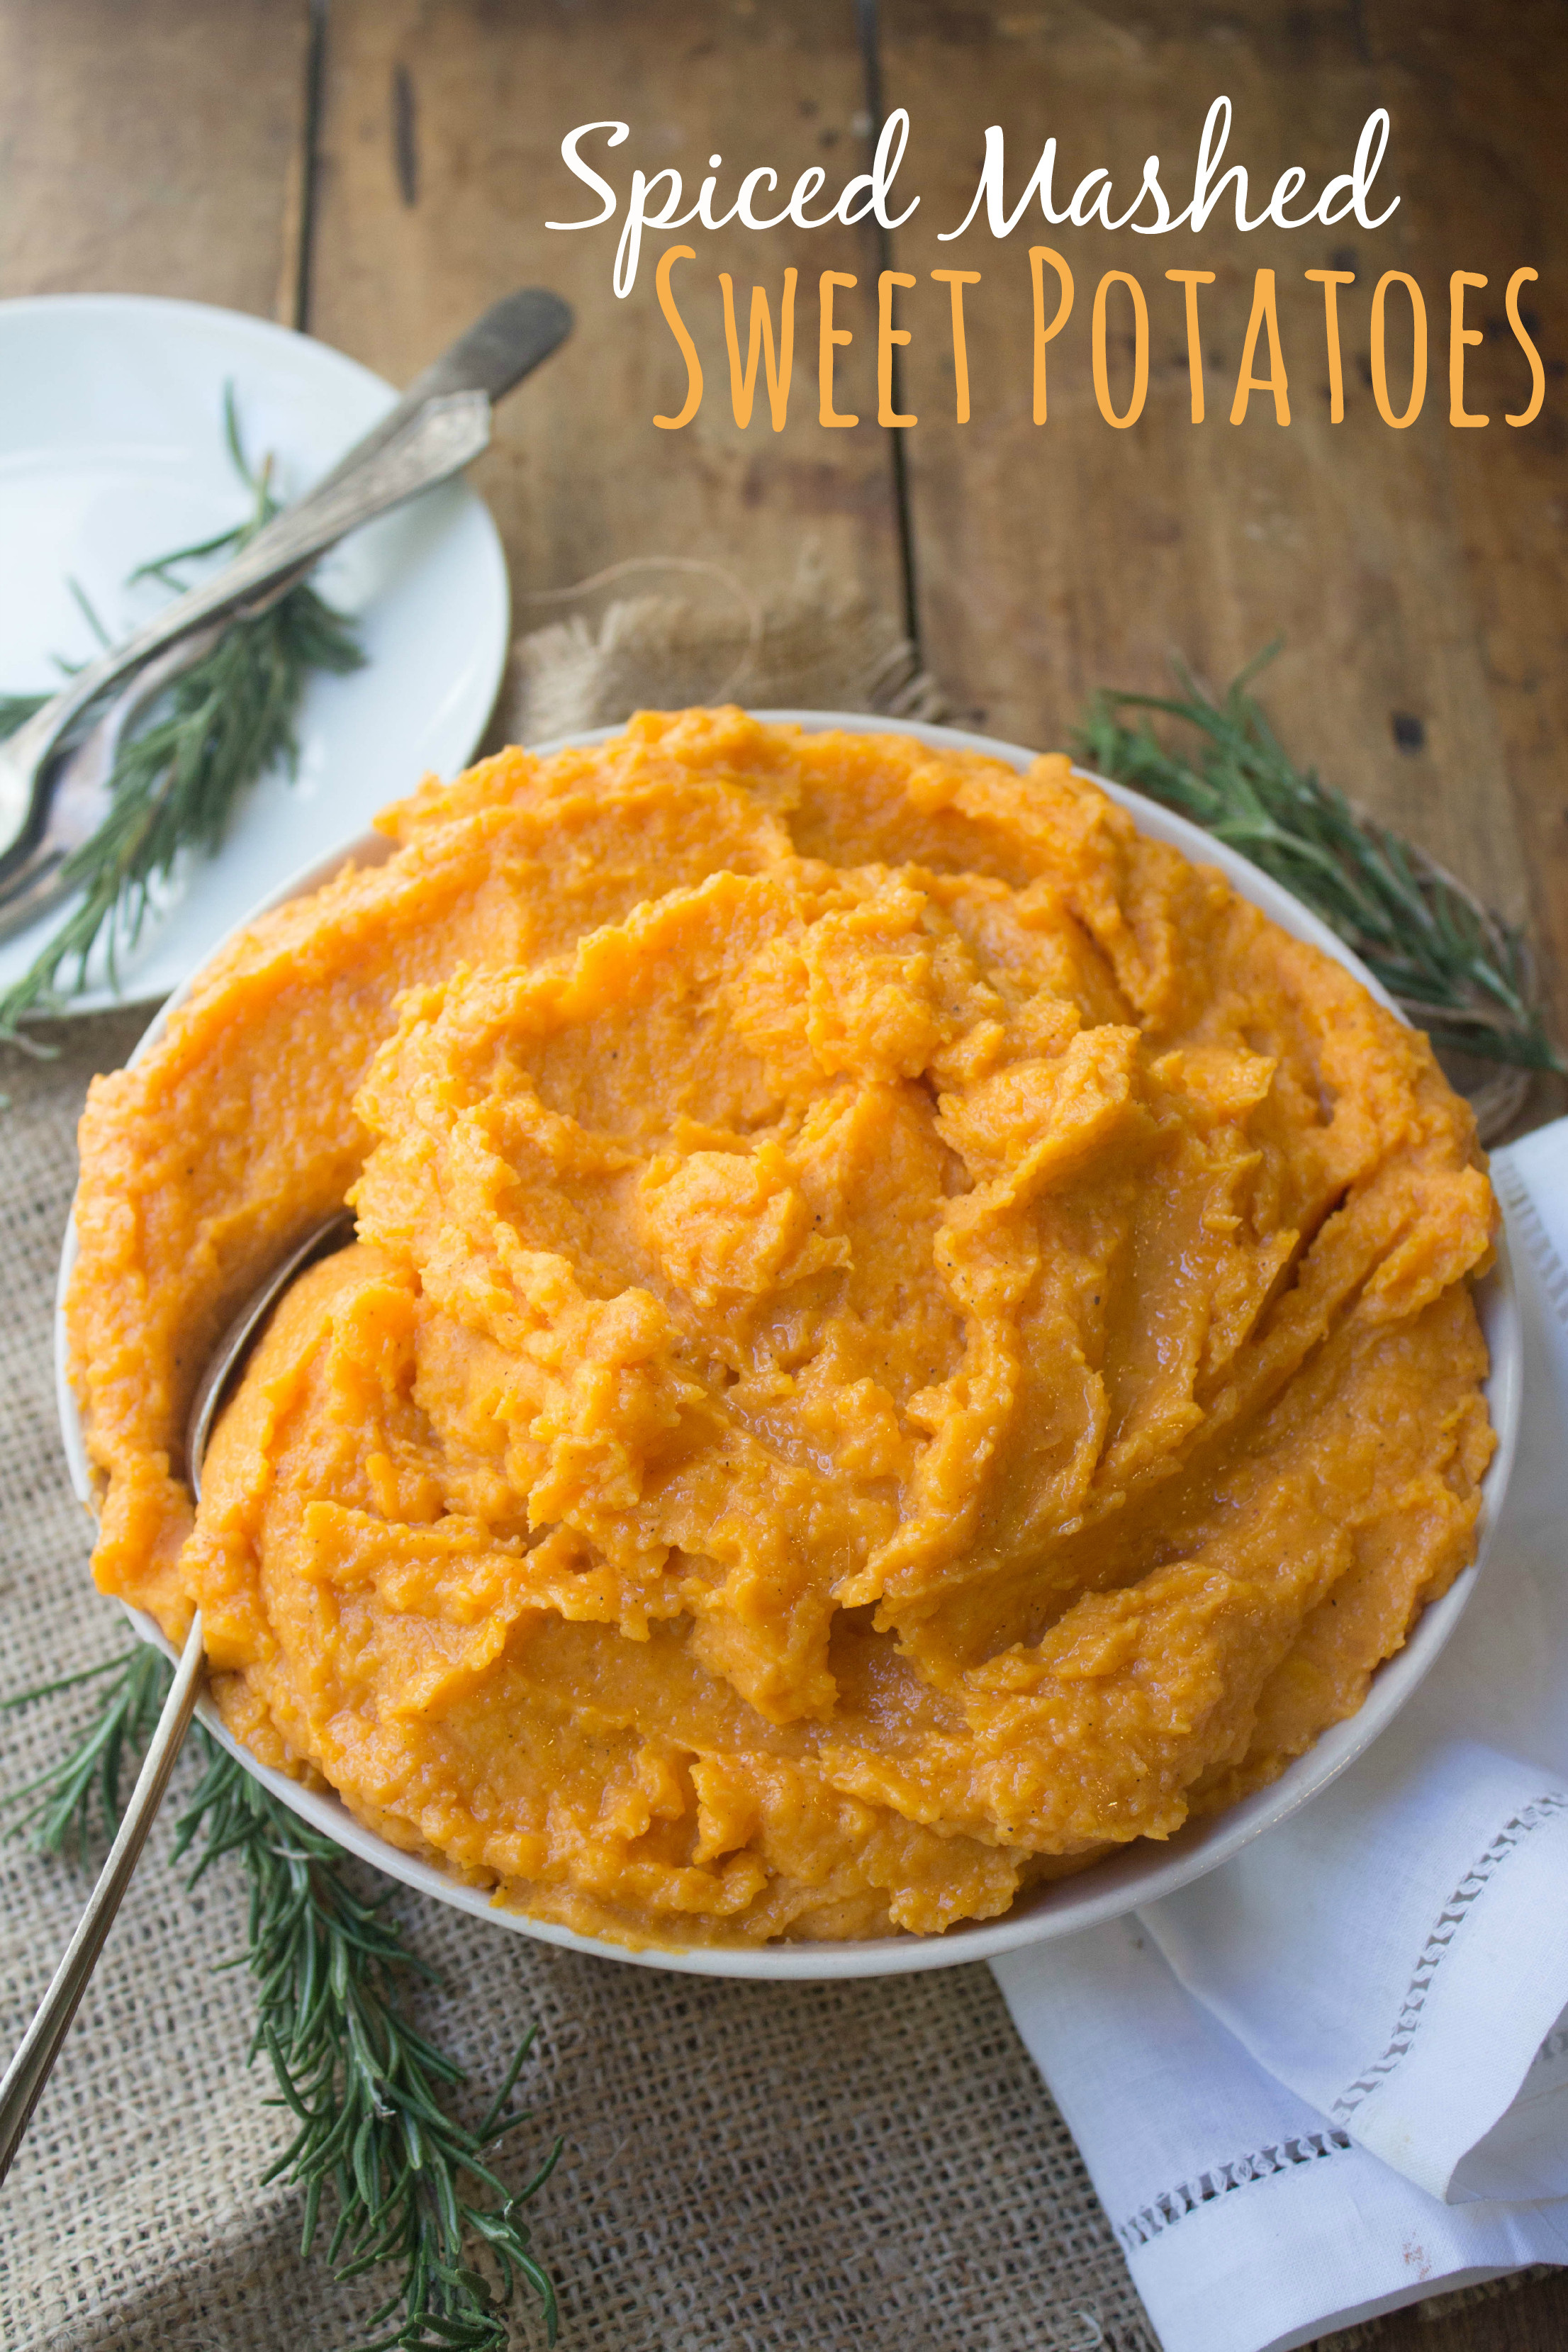 Sweet Potatoes Thanksgiving Recipes
 Spiced Mashed Sweet Potatoes